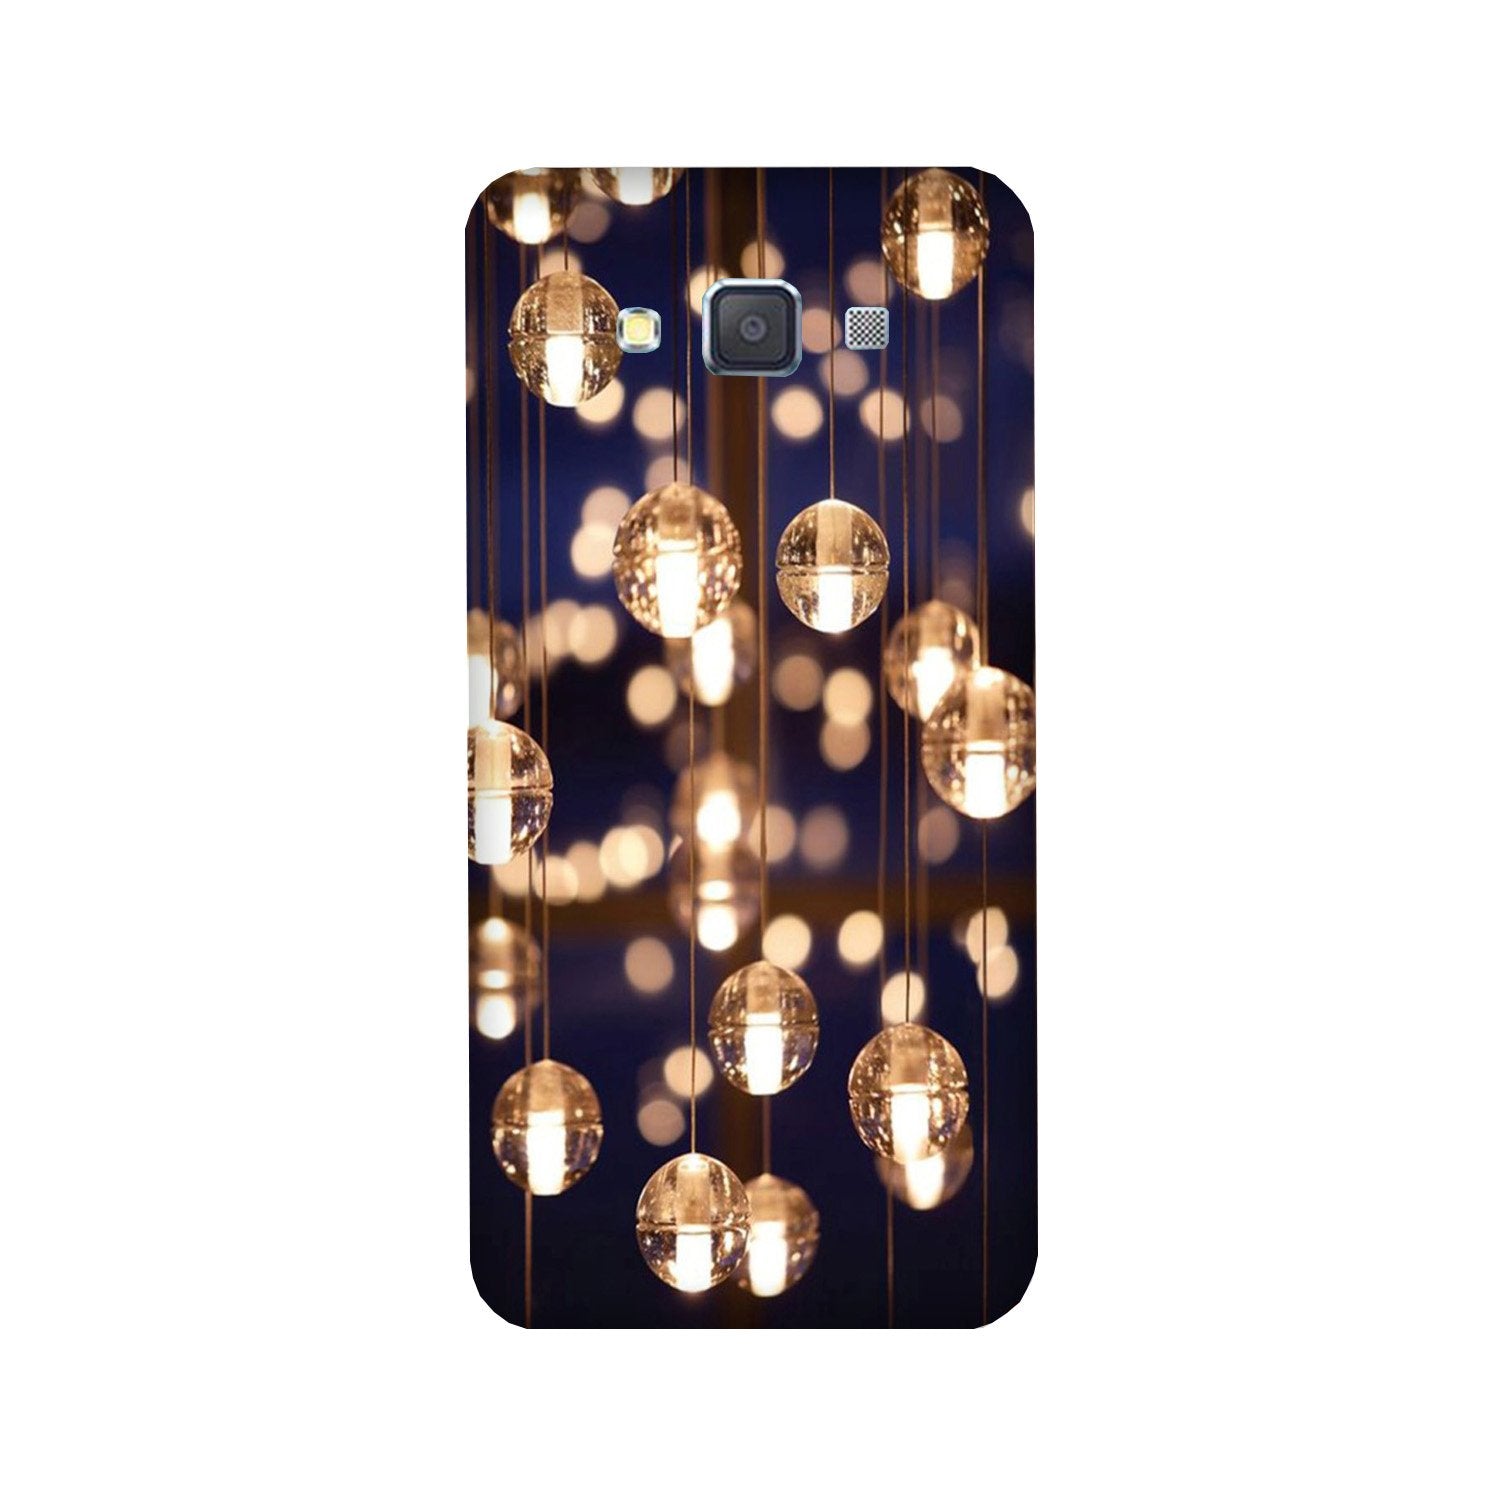 Party Bulb2 Case for Galaxy A5 (2015)